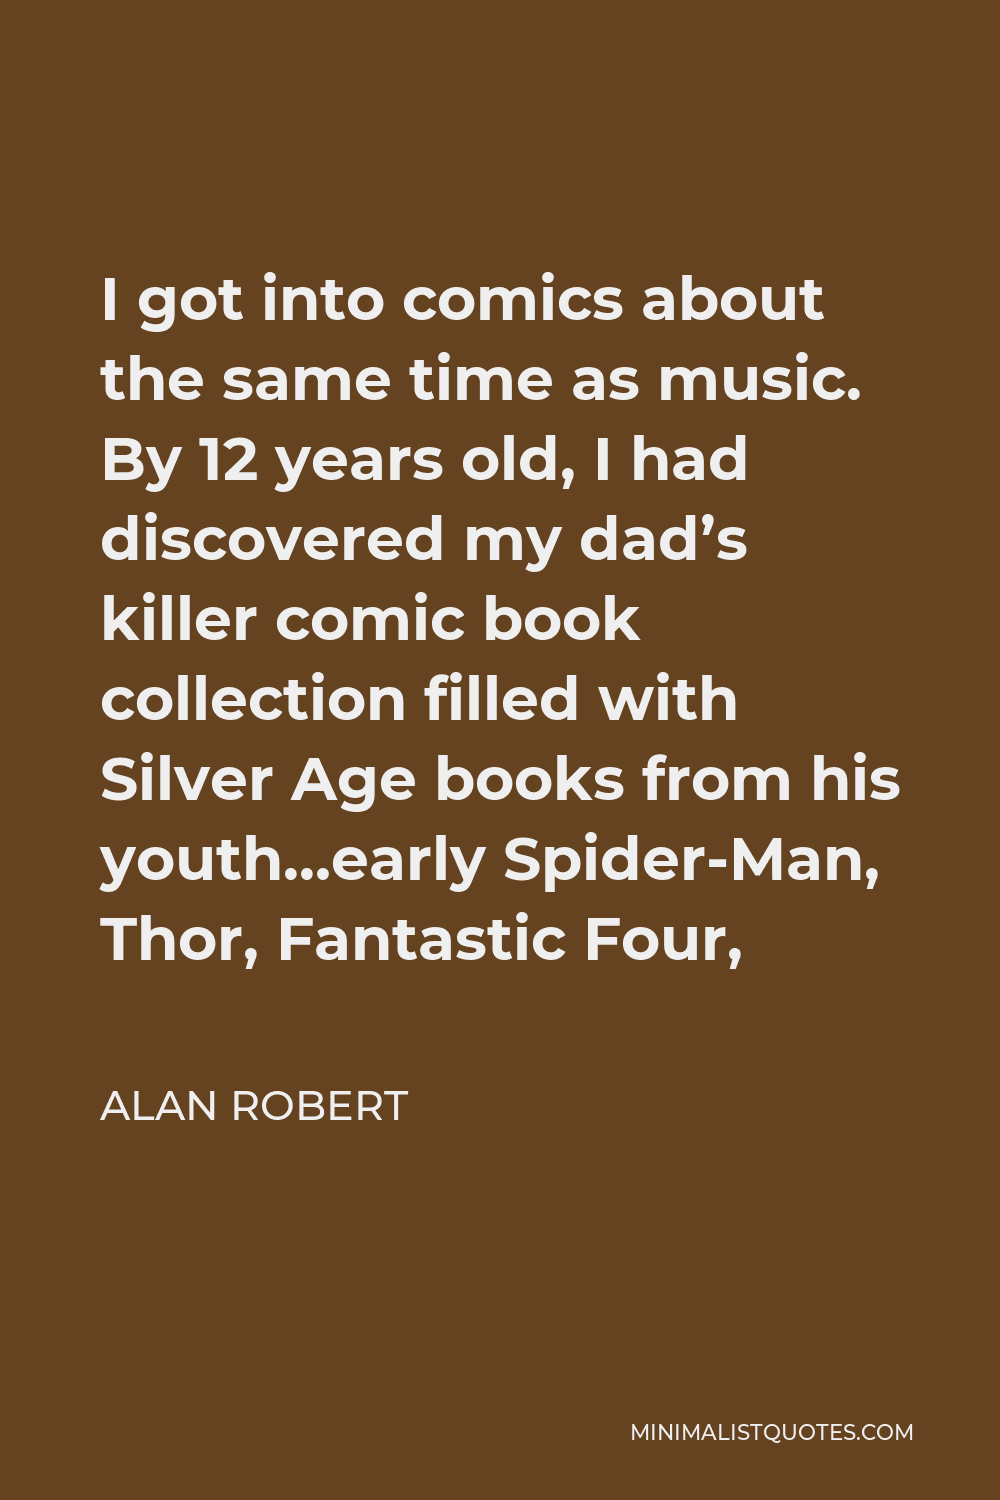 Alan Robert Quote - I got into comics about the same time as music. By 12 years old, I had discovered my dad’s killer comic book collection filled with Silver Age books from his youth…early Spider-Man, Thor, Fantastic Four,